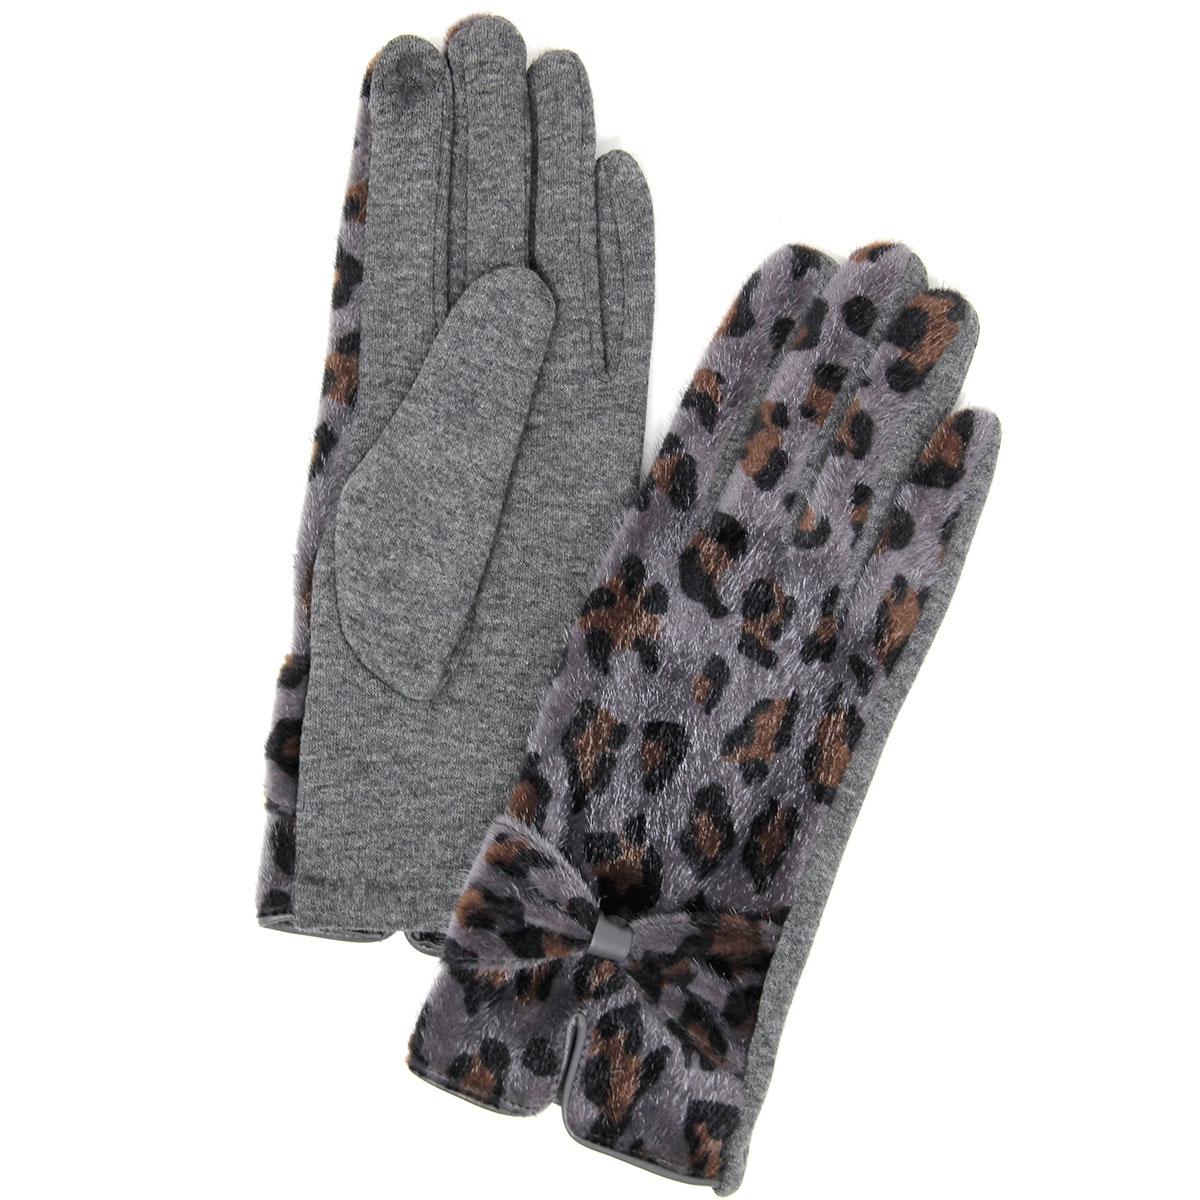 2390 - Touch Screen Smart Gloves LOG-123 Leopard Red MB - One Size Fits Most